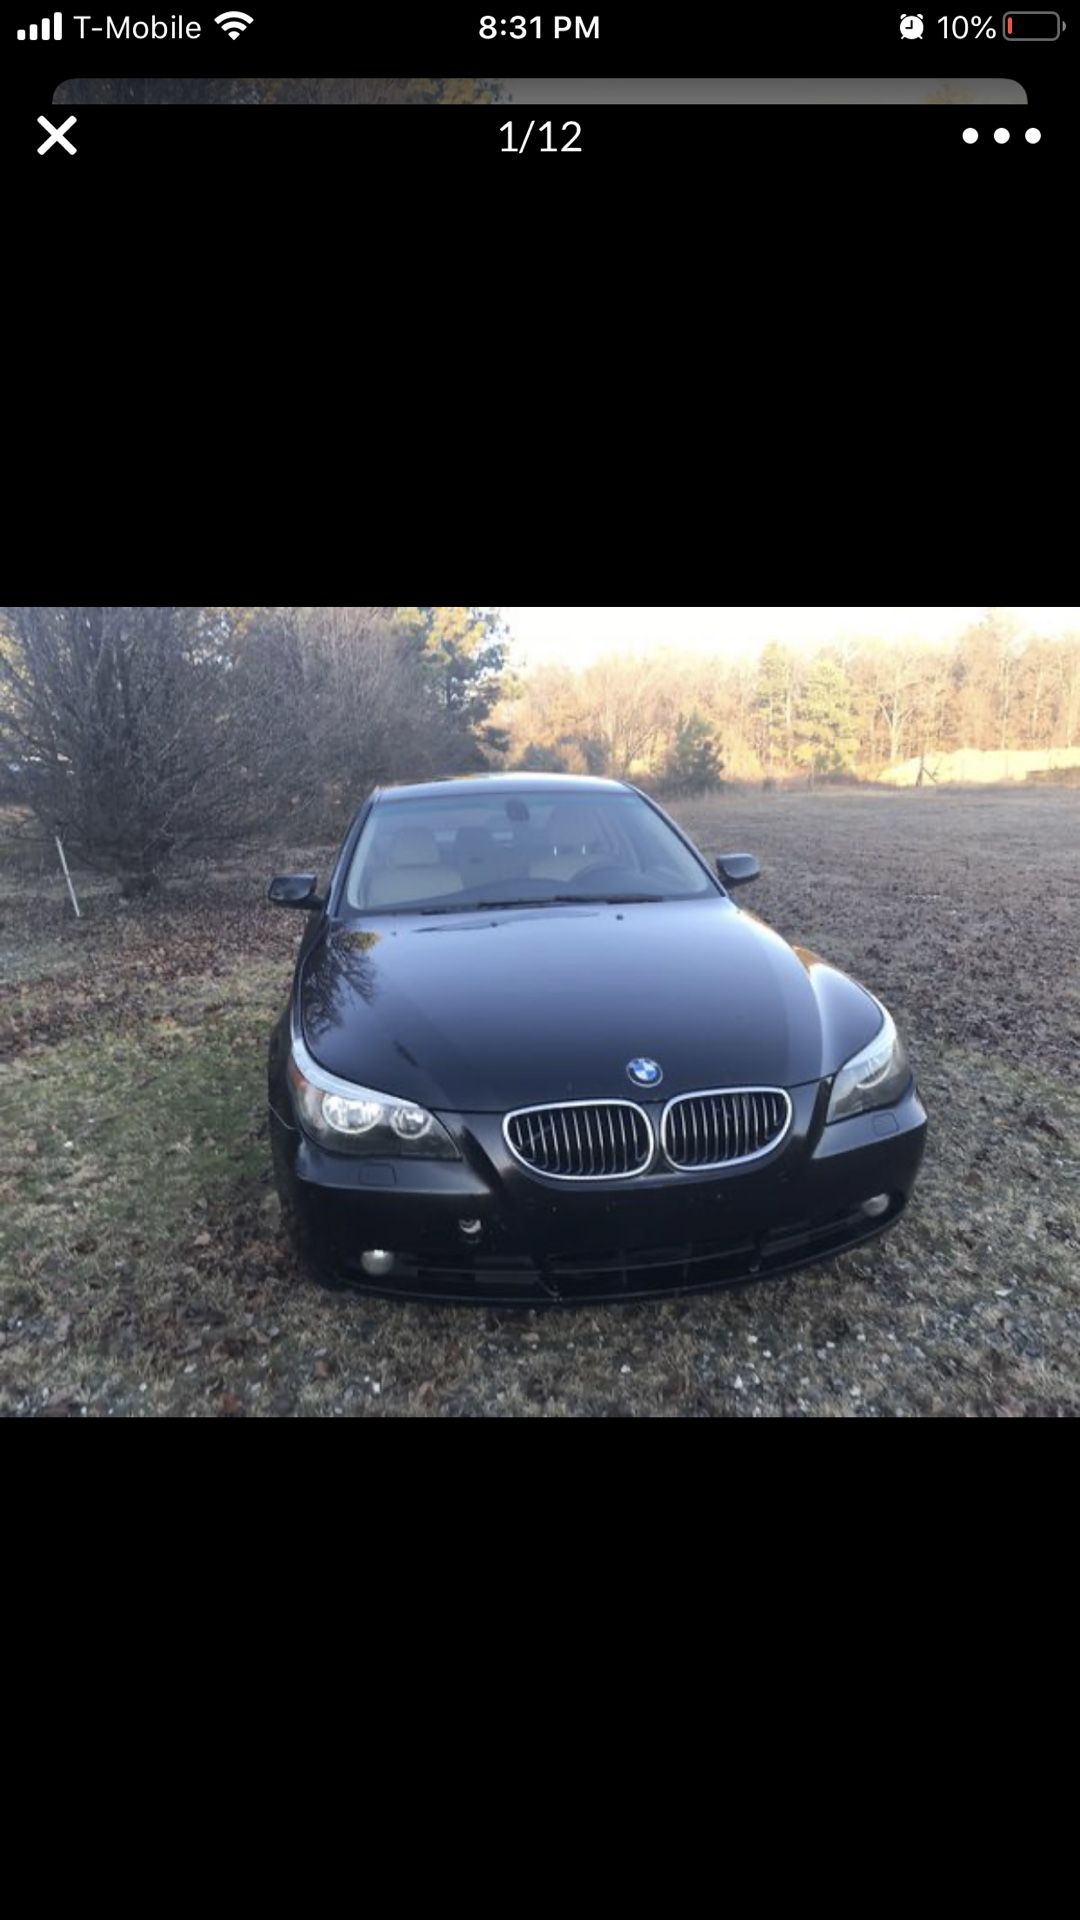 2004 bmw 525i for sale leather interior sunroof very clean inside run and drives good